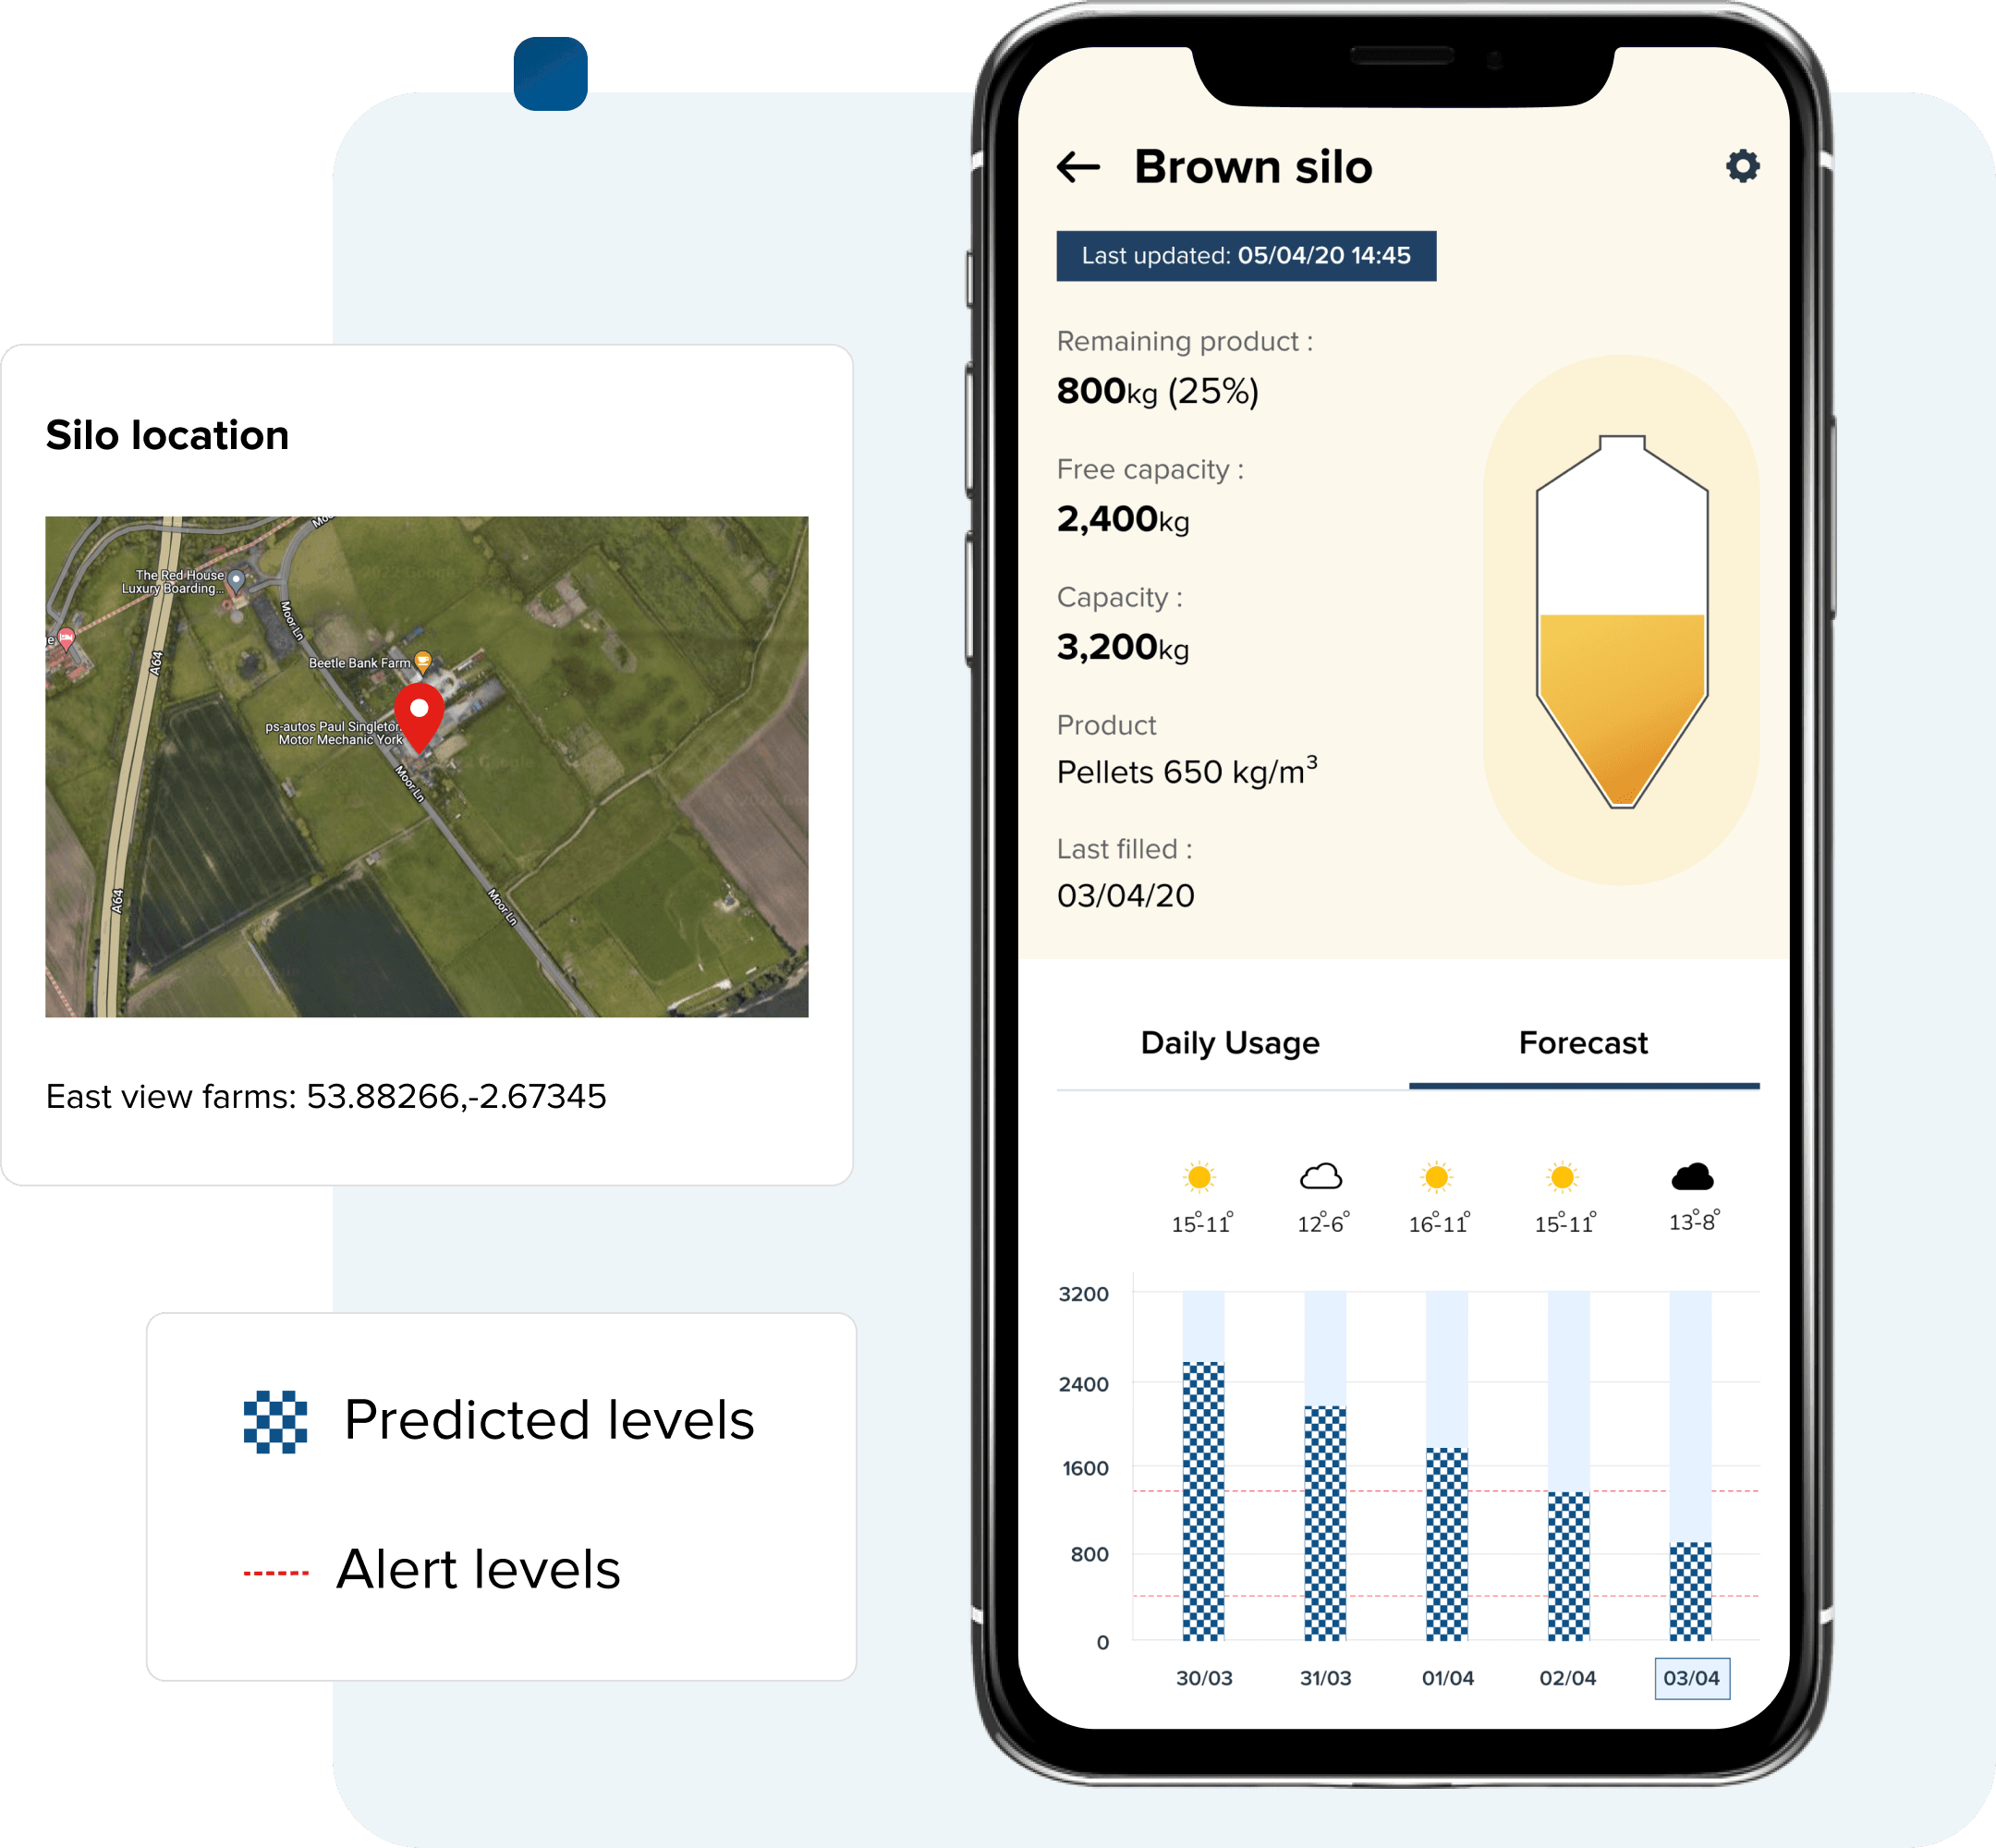 Usage history and forecasts in the FeedAlert app by Collinson